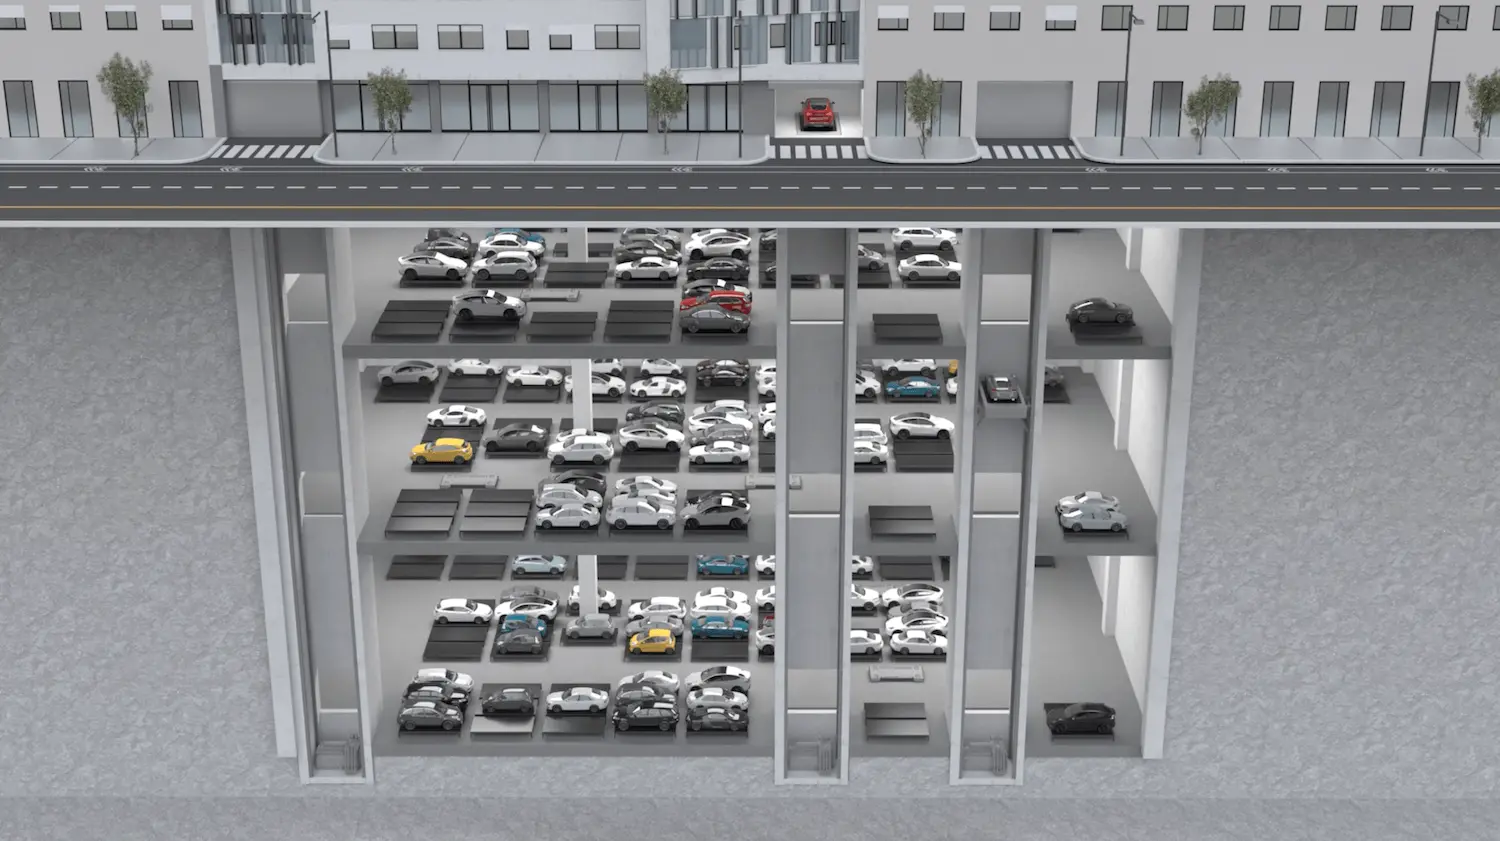 Illustration of a multi-level parking garage viewed from above, showing rows of parked cars and an adjacent street with a red car driving past.